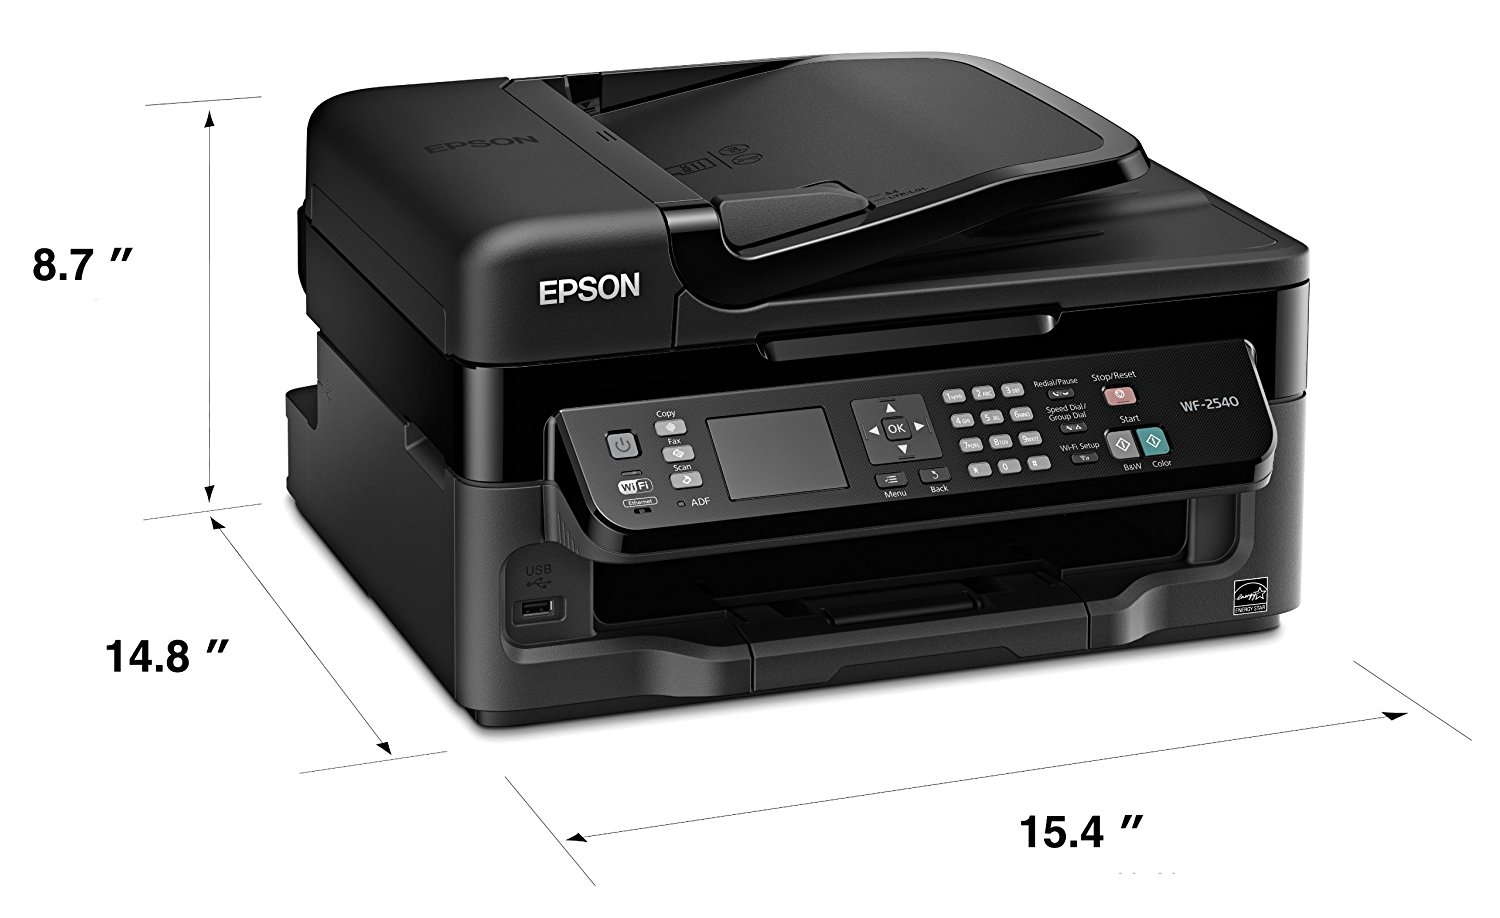 Epson Workforce Wf 2540 Wireless Color All In One Inkjet Printer With Scanner And Copier 4012